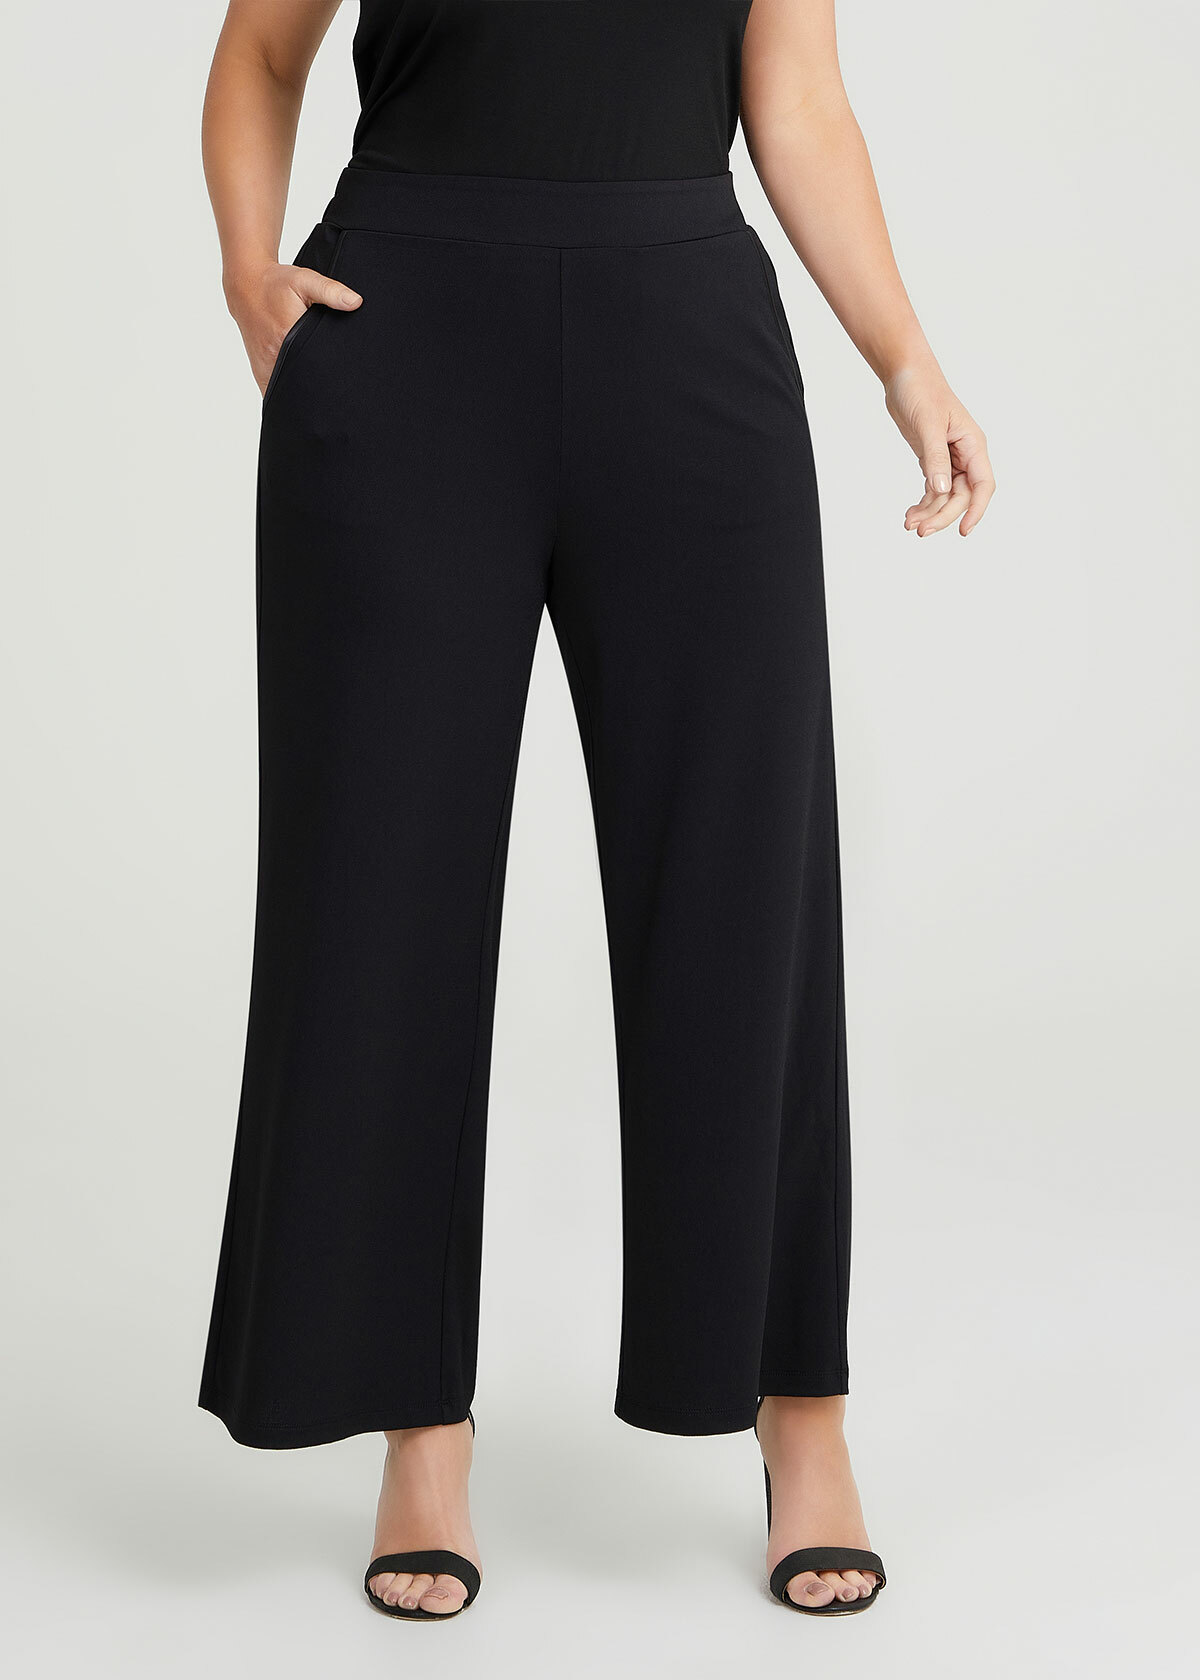 Girl With Curves Petite Wide Leg Knit Pant